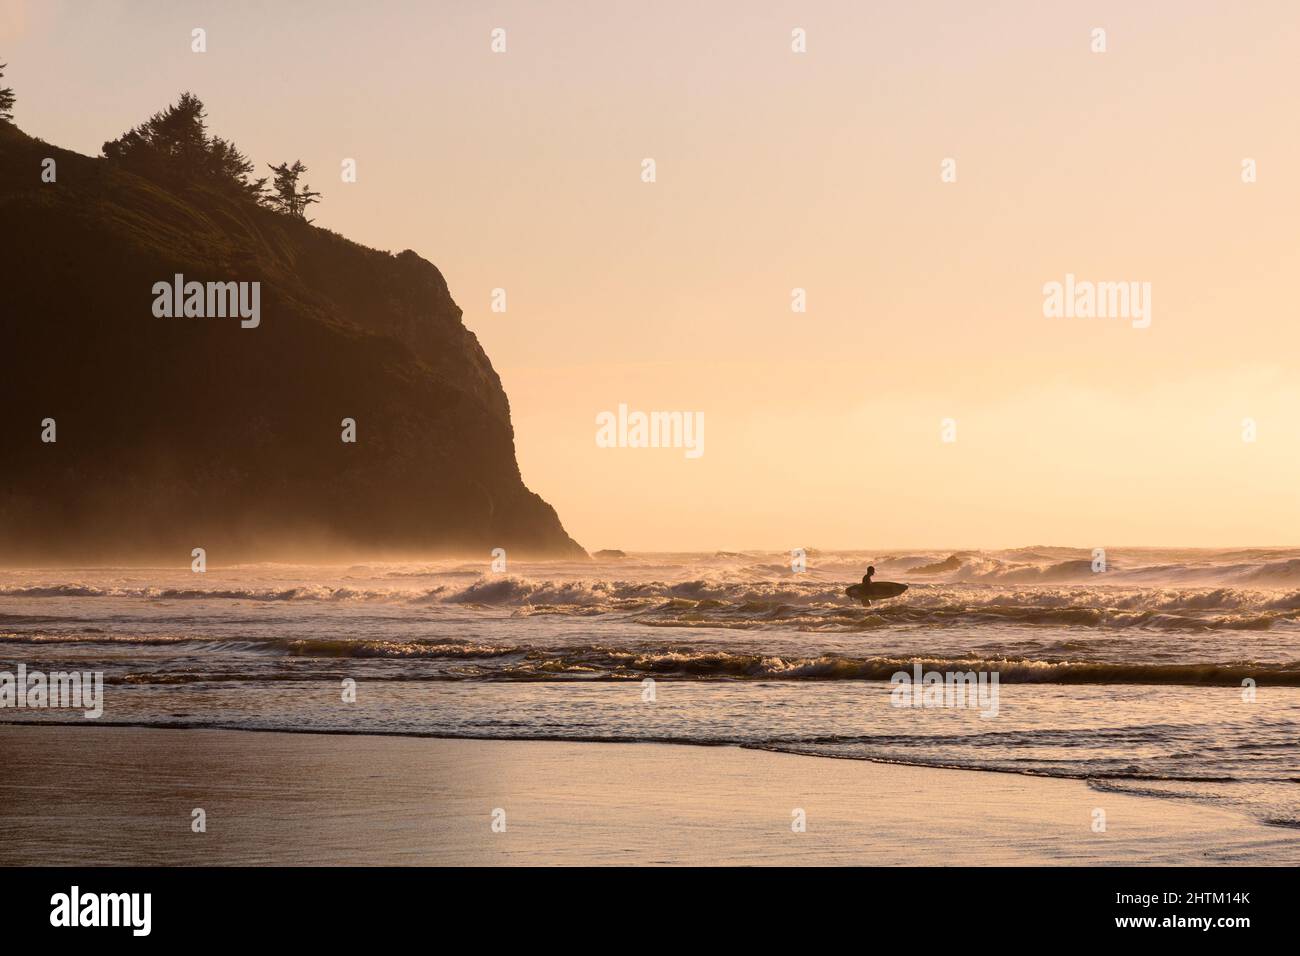 Silhouette of this loan surfer in the waves near a cliff.  Photographed at Trinidad State Beach in Humboldt County, California, USA. Stock Photo